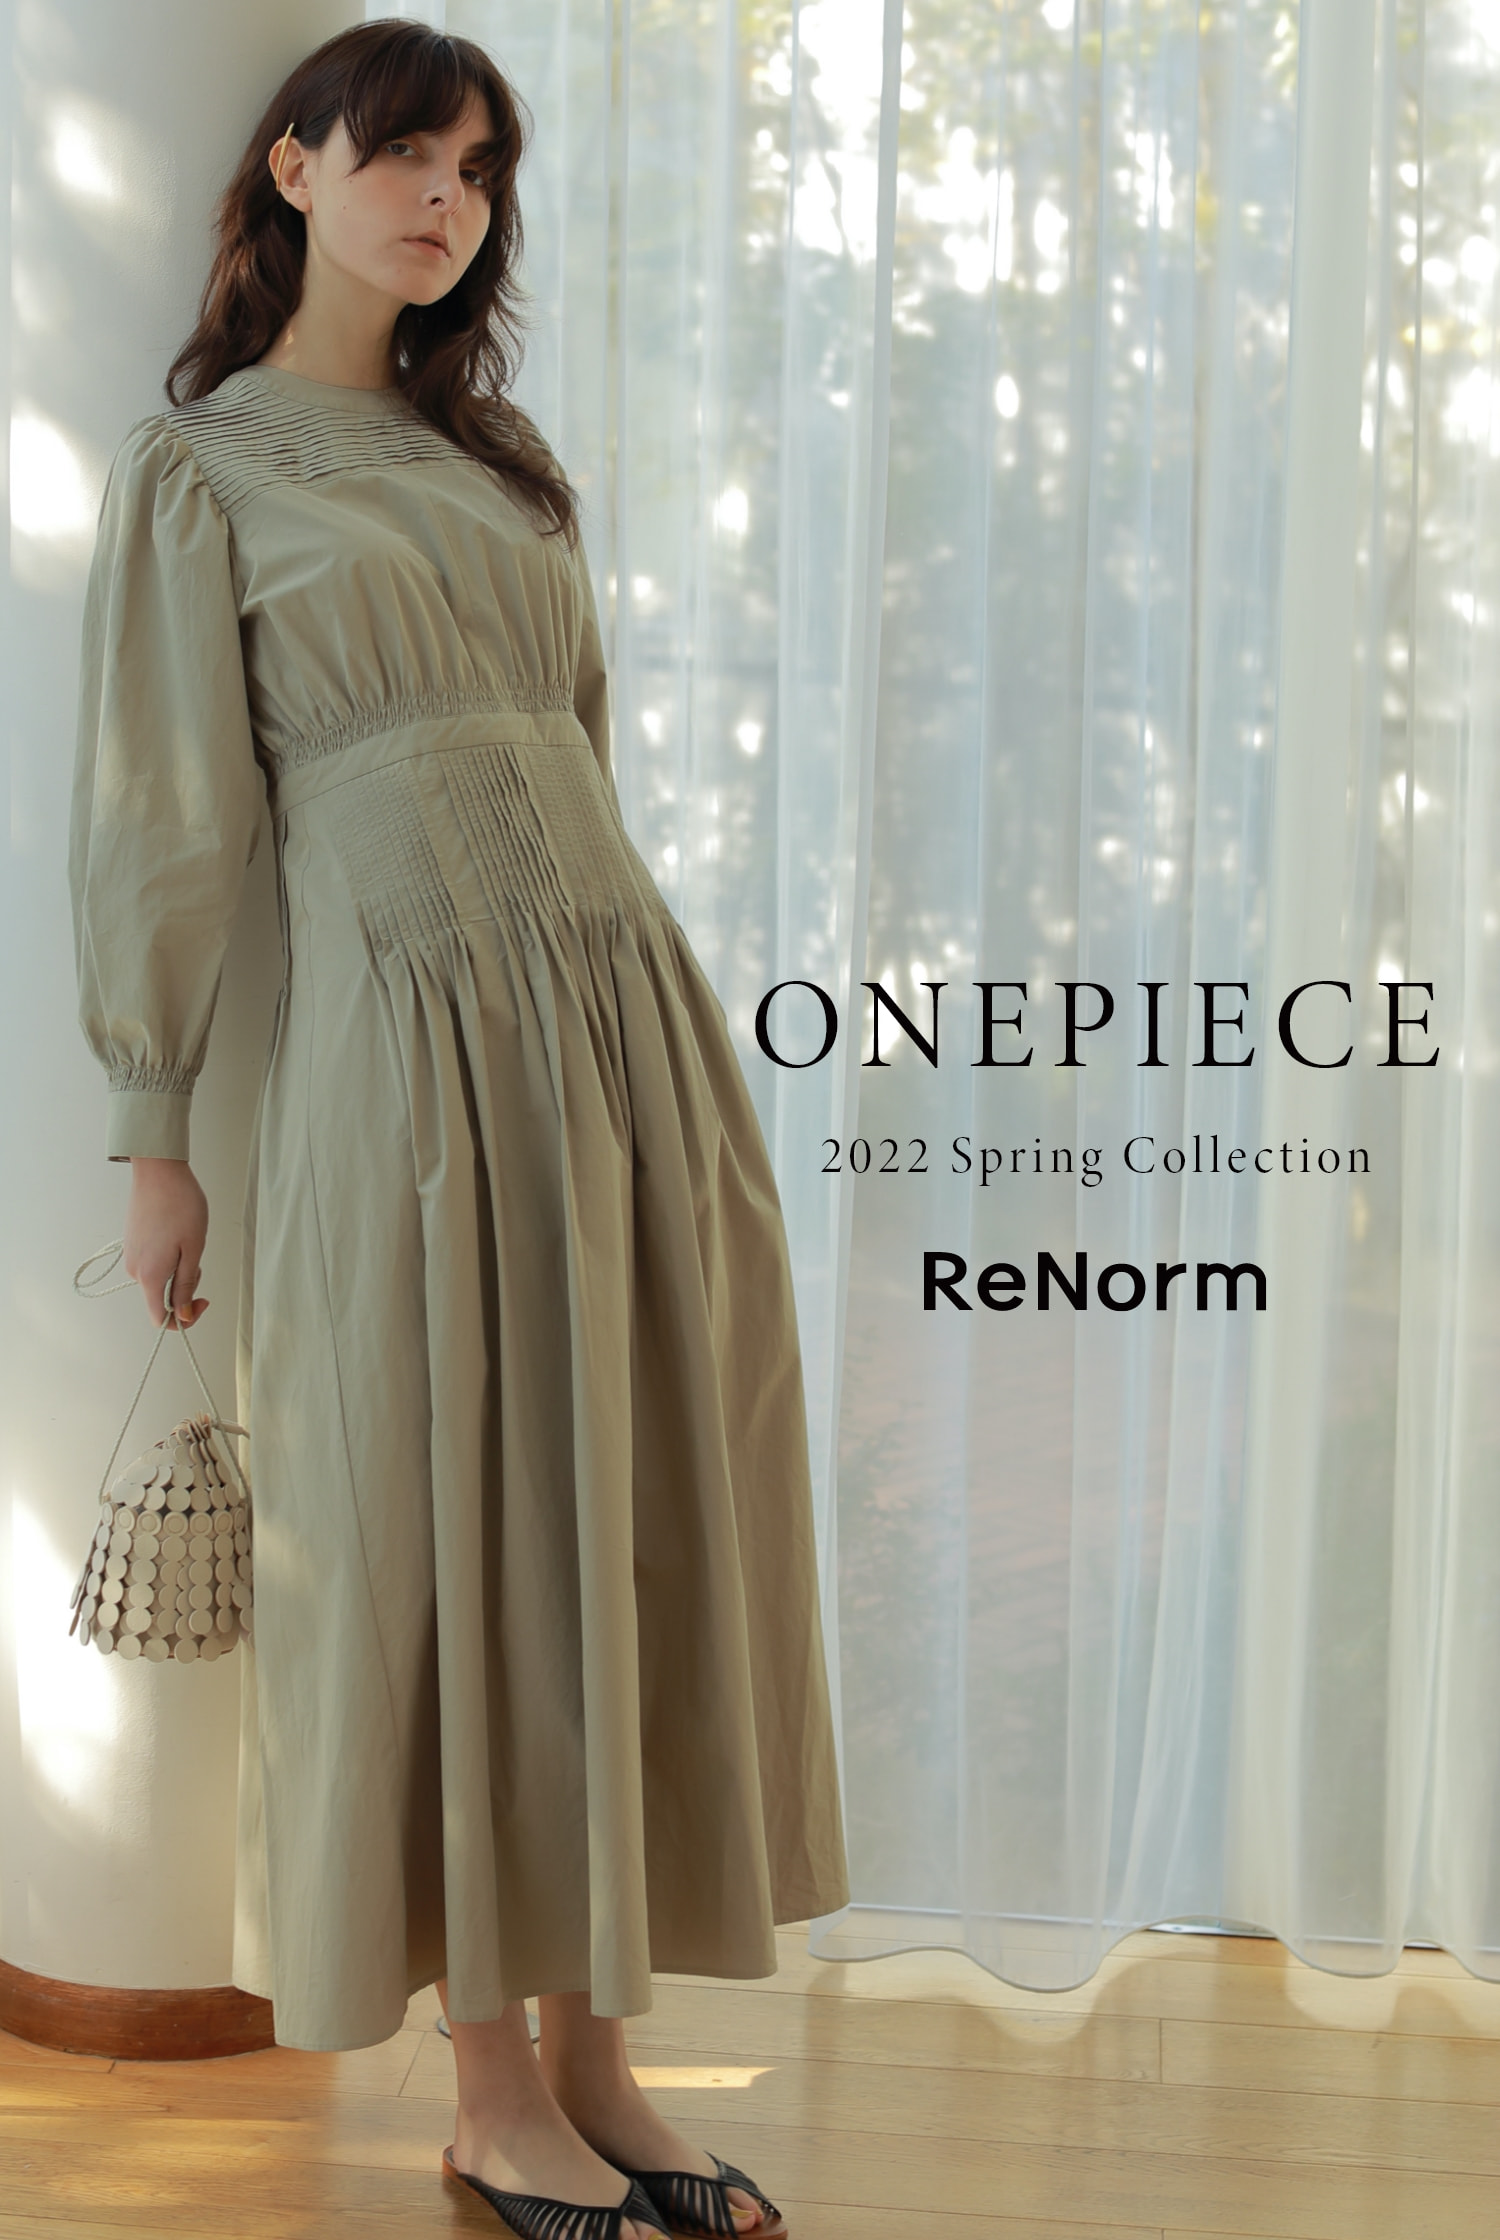 ReNorm ONEPIECE 2022 Spring Collection